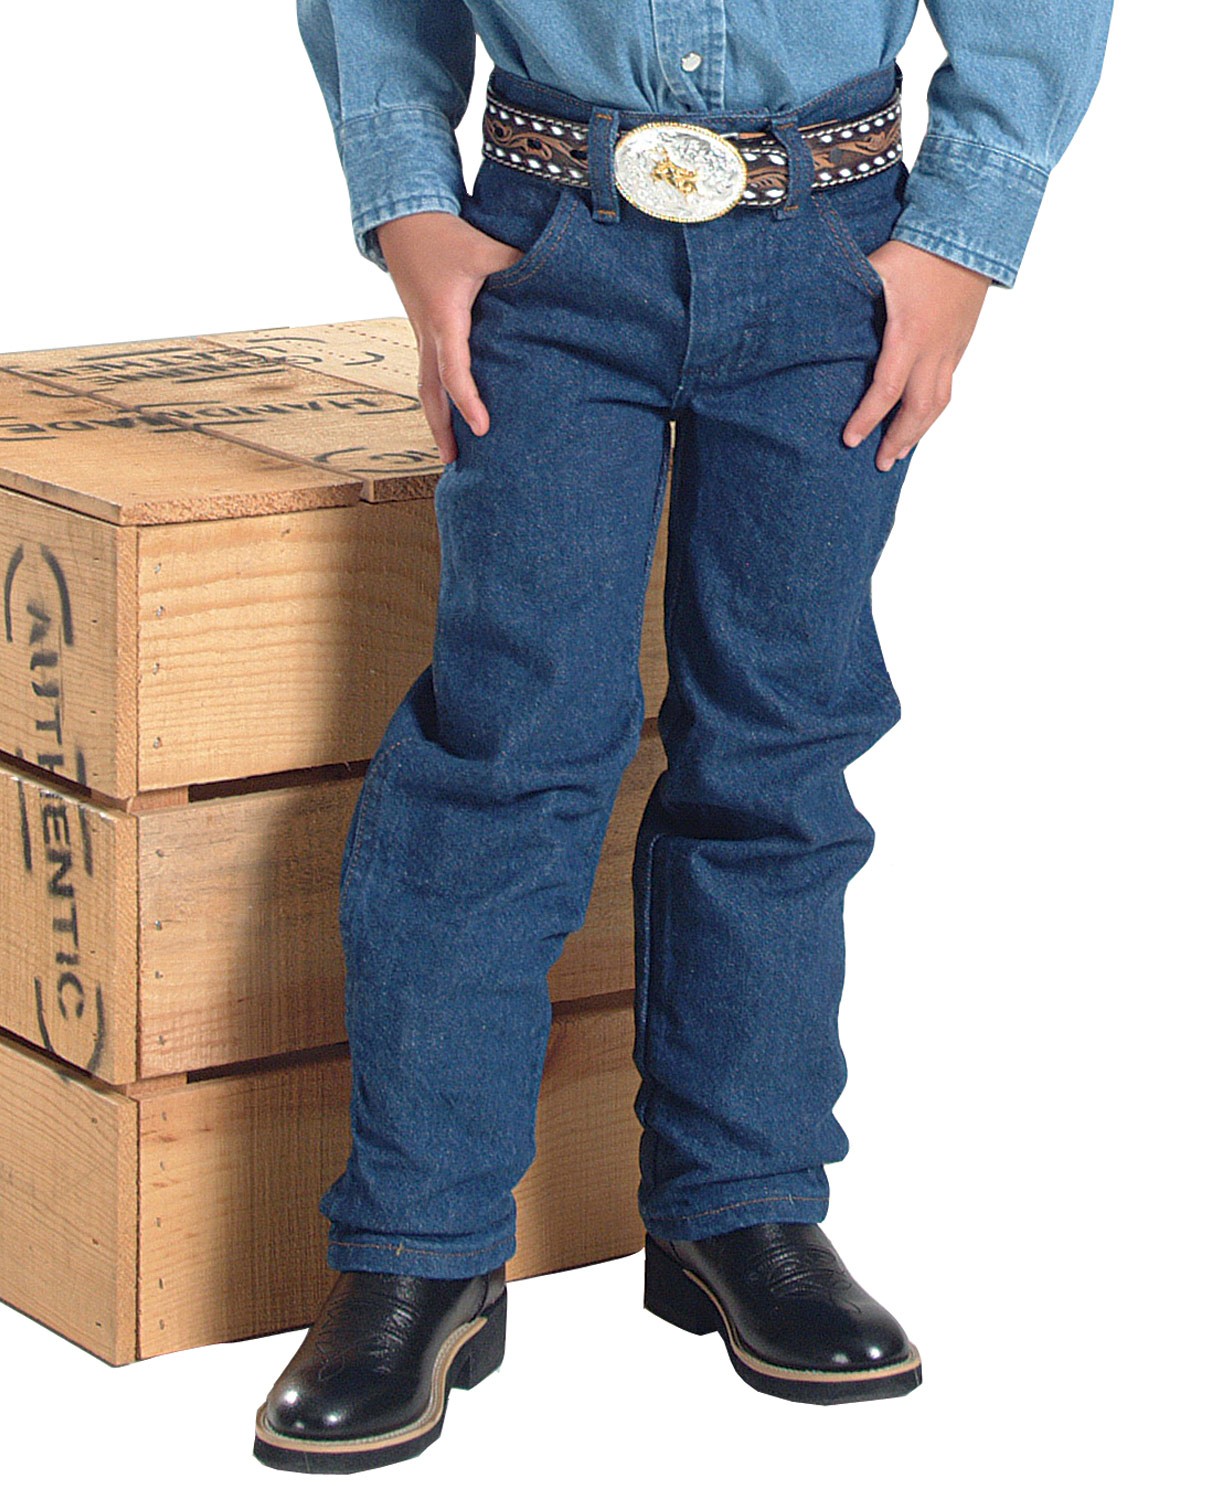 Wrangler® Pro Rodeo 13MWZ Jeans - Regular and Slim - Toddler and Child  Sizes - Fort Brands